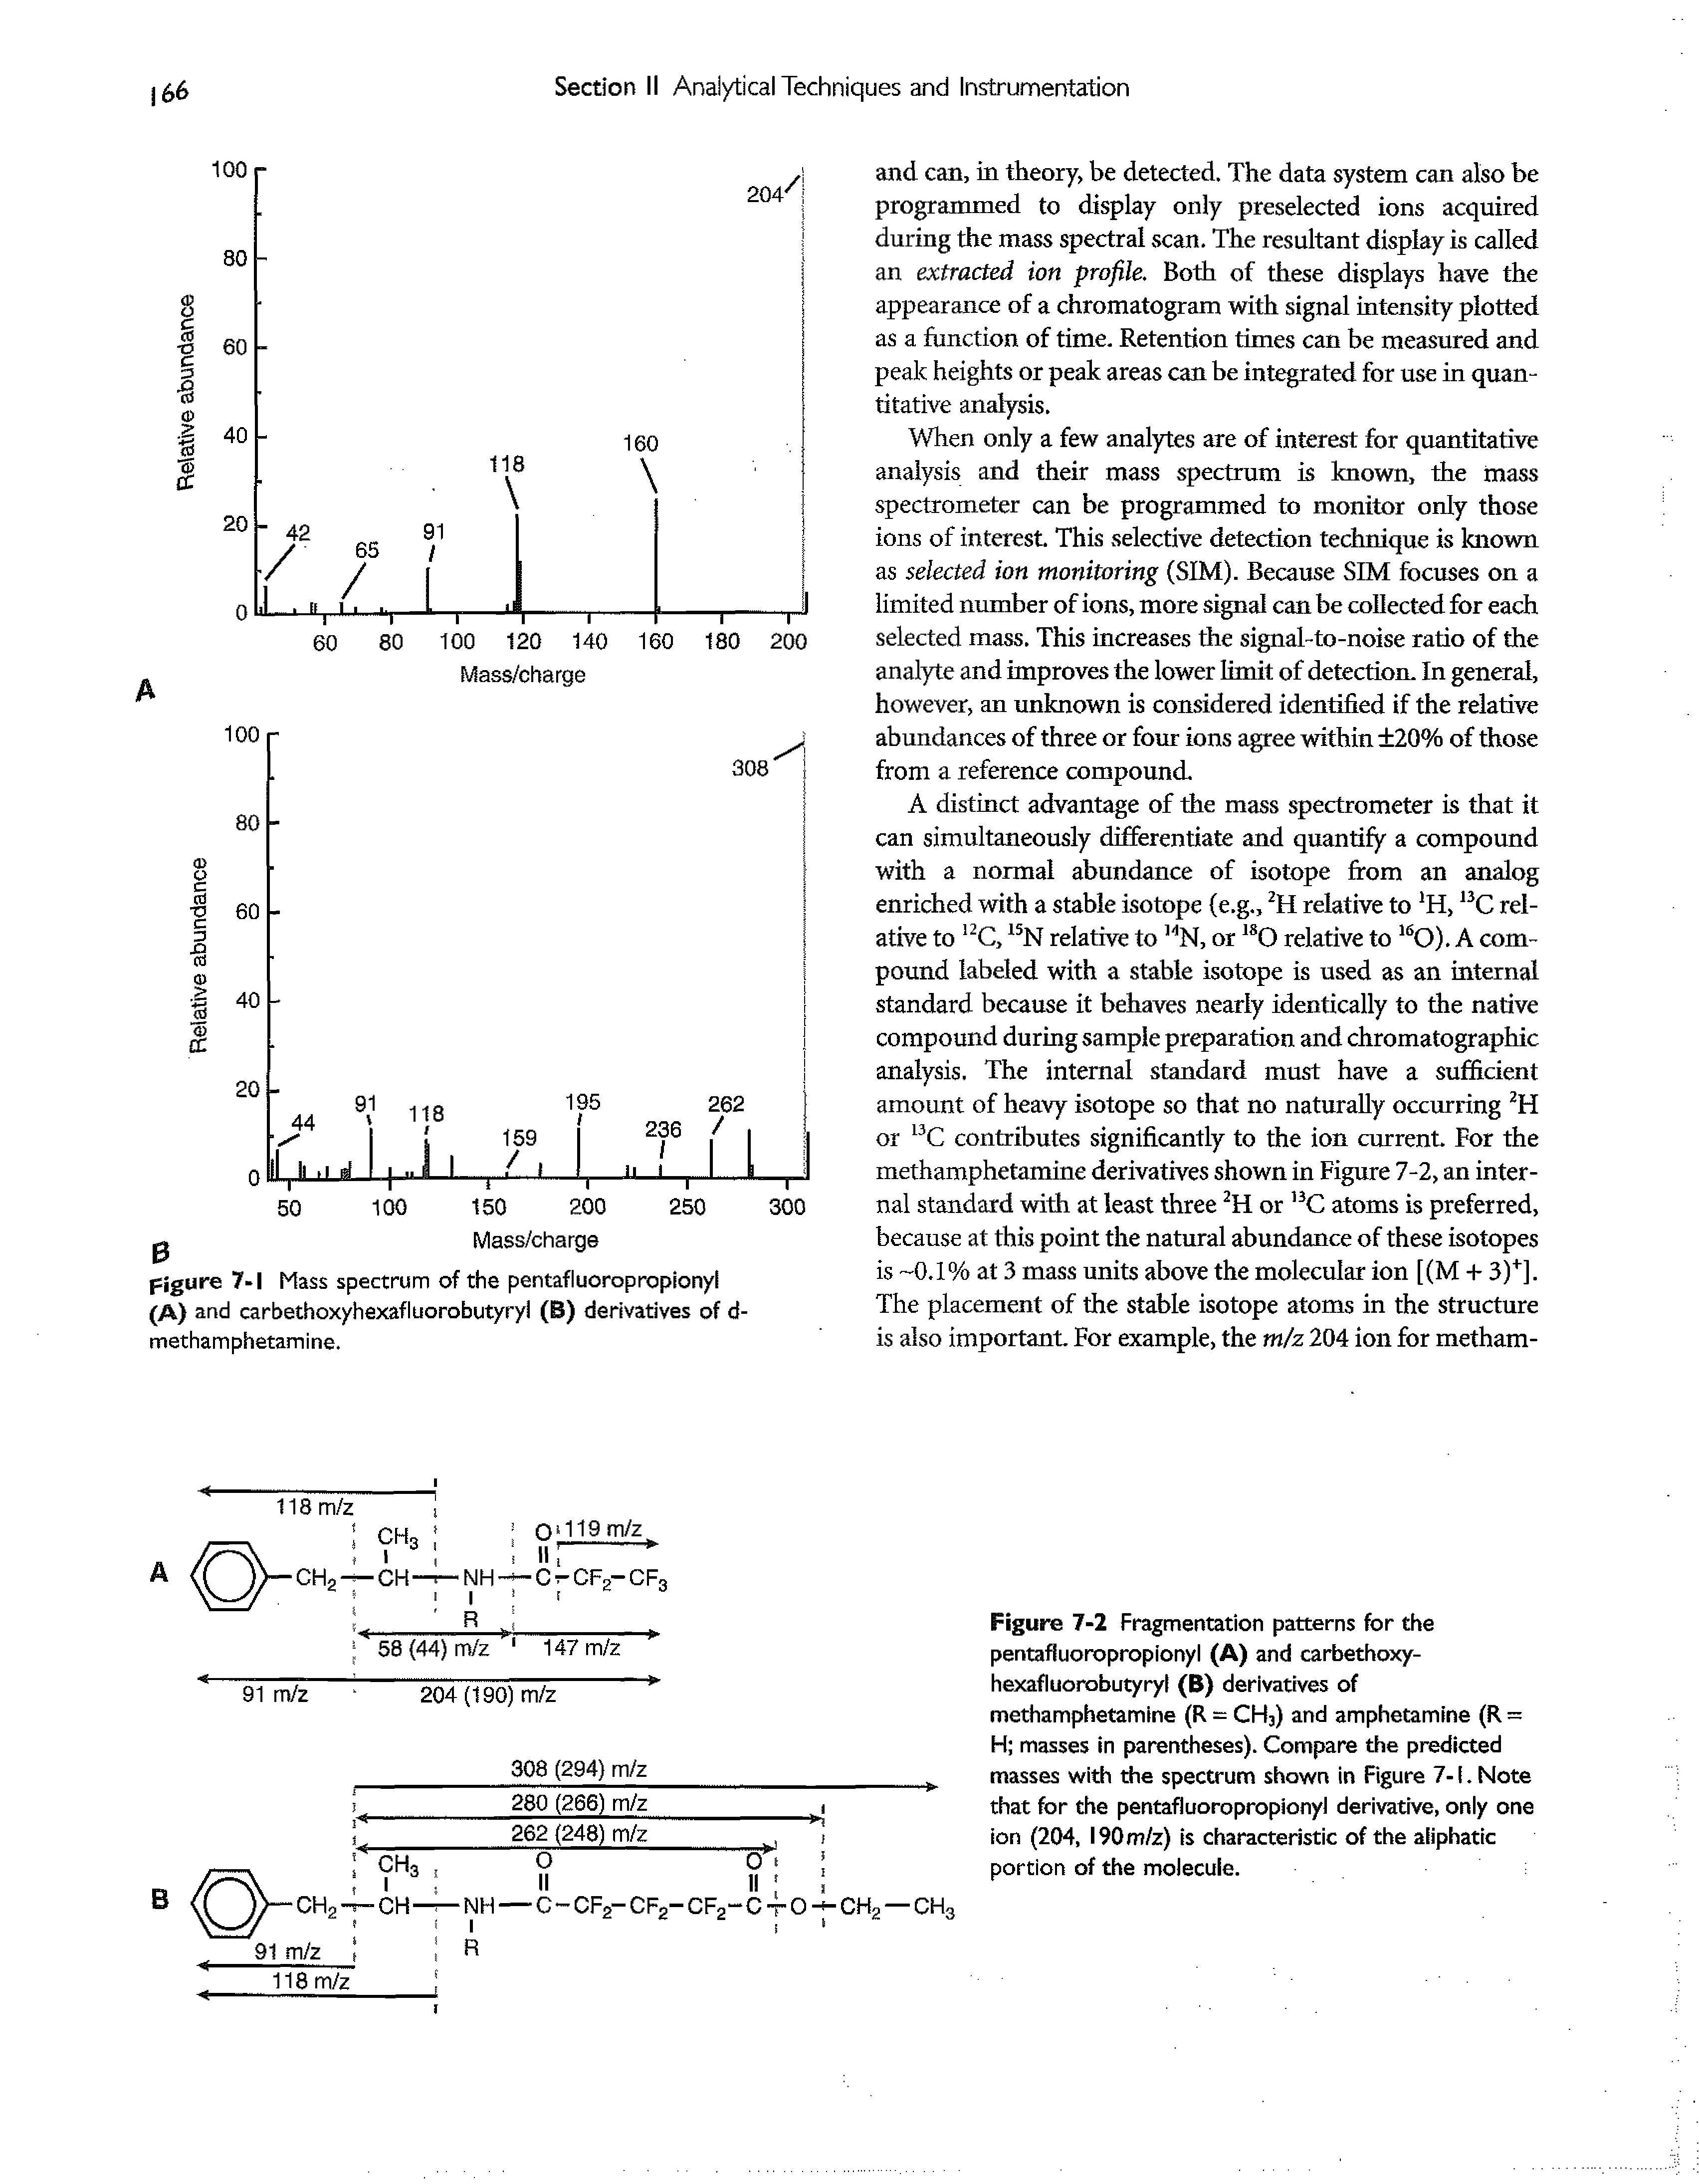 Figure 7-2 Fragmentation patterns for the pentafluoropropionyl (A) and carbethoxy-hexafluorobutyryl (B) derivatives of methamphetamine (R = CH3) and amphetamine (R = H masses in parentheses). Compare the predicted masses with the spectrum shown in Figure 7-1. Note that for the pentafluoropropionyl derivative, only one ion (204, 190 m/z) is characteristic of the aliphatic portion of the molecule.